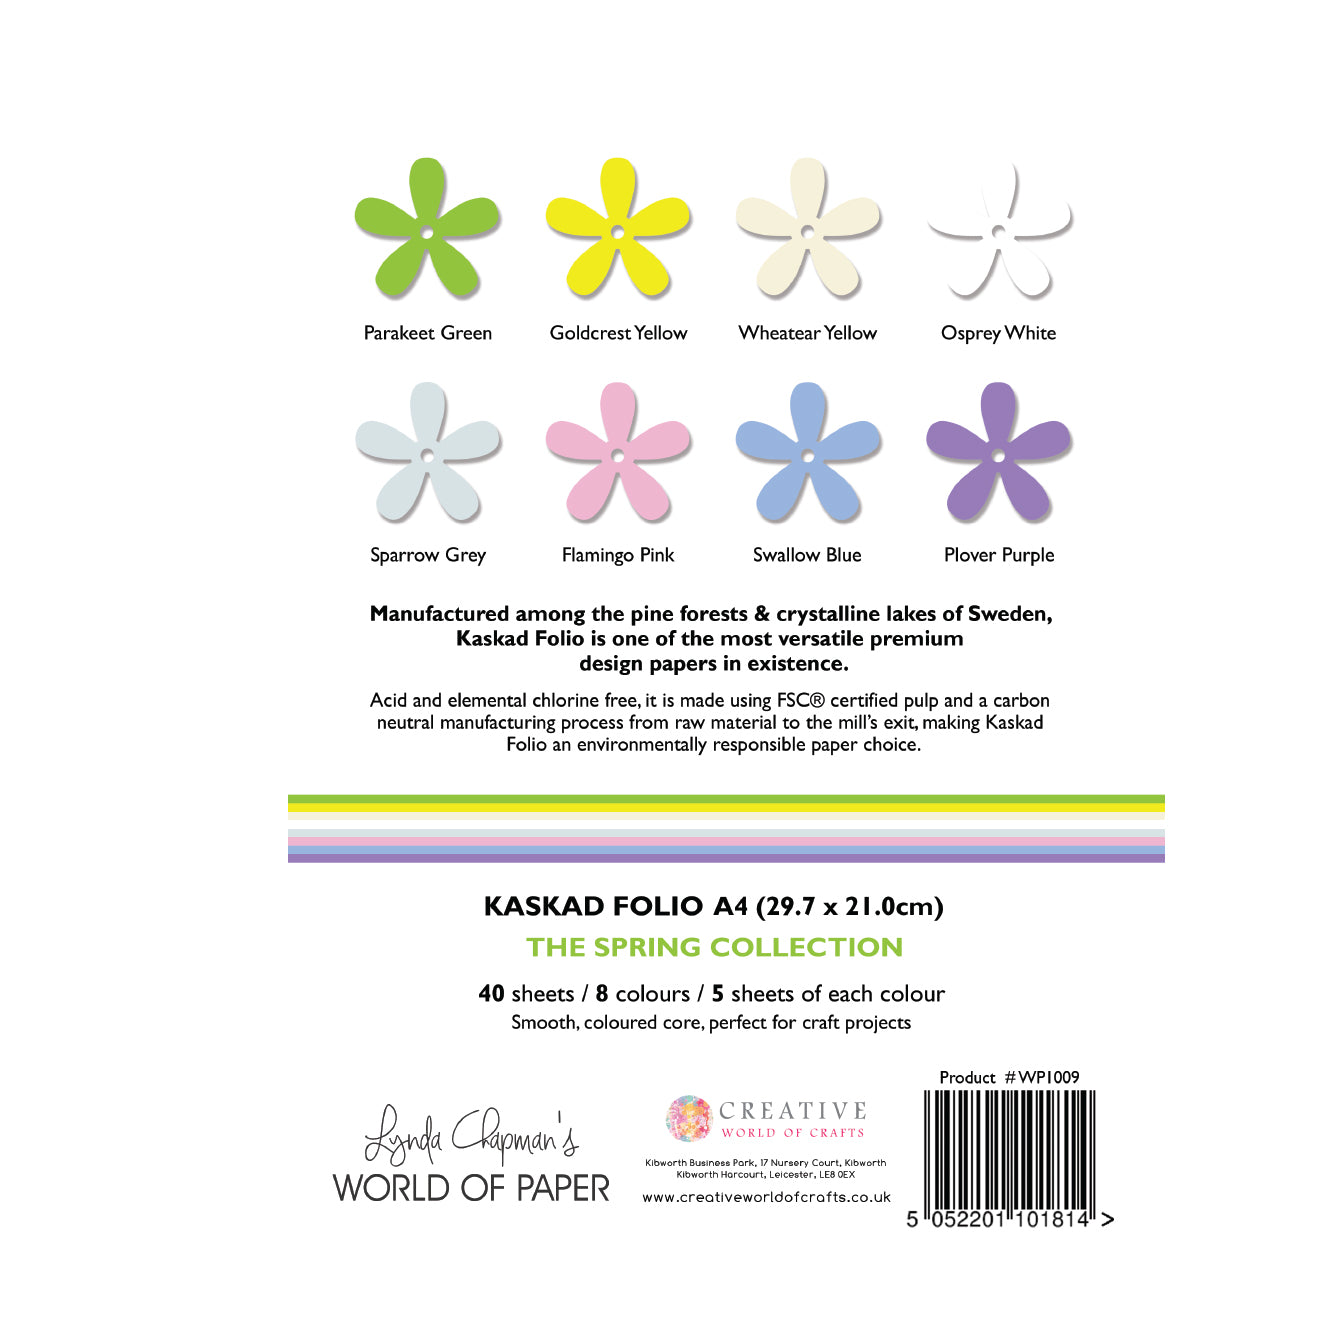 Kaskad Folio Spring Collection A4 225gsm Coloured Core Cardstock 40 sheets